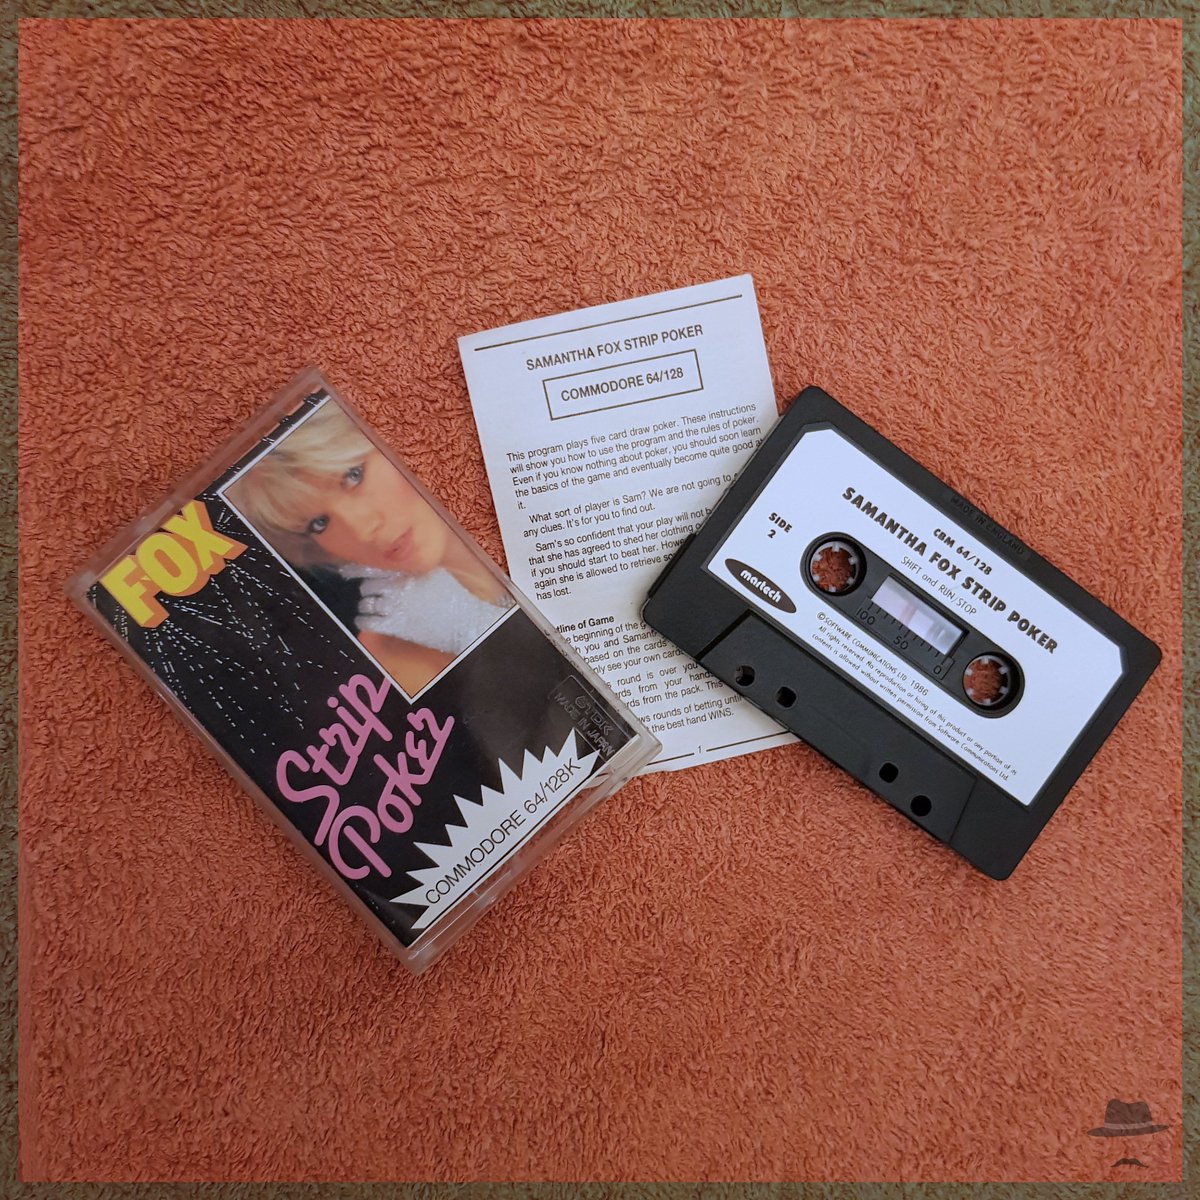 And here we have another classic #Game. #SamanthaFox #Strippoker. The graphics were less then impressive but the images in my mind made up for that... #Retro #RetroComputing #RetroGaming #RetroGame #Commodore #Commodore64 #C64 #C64c